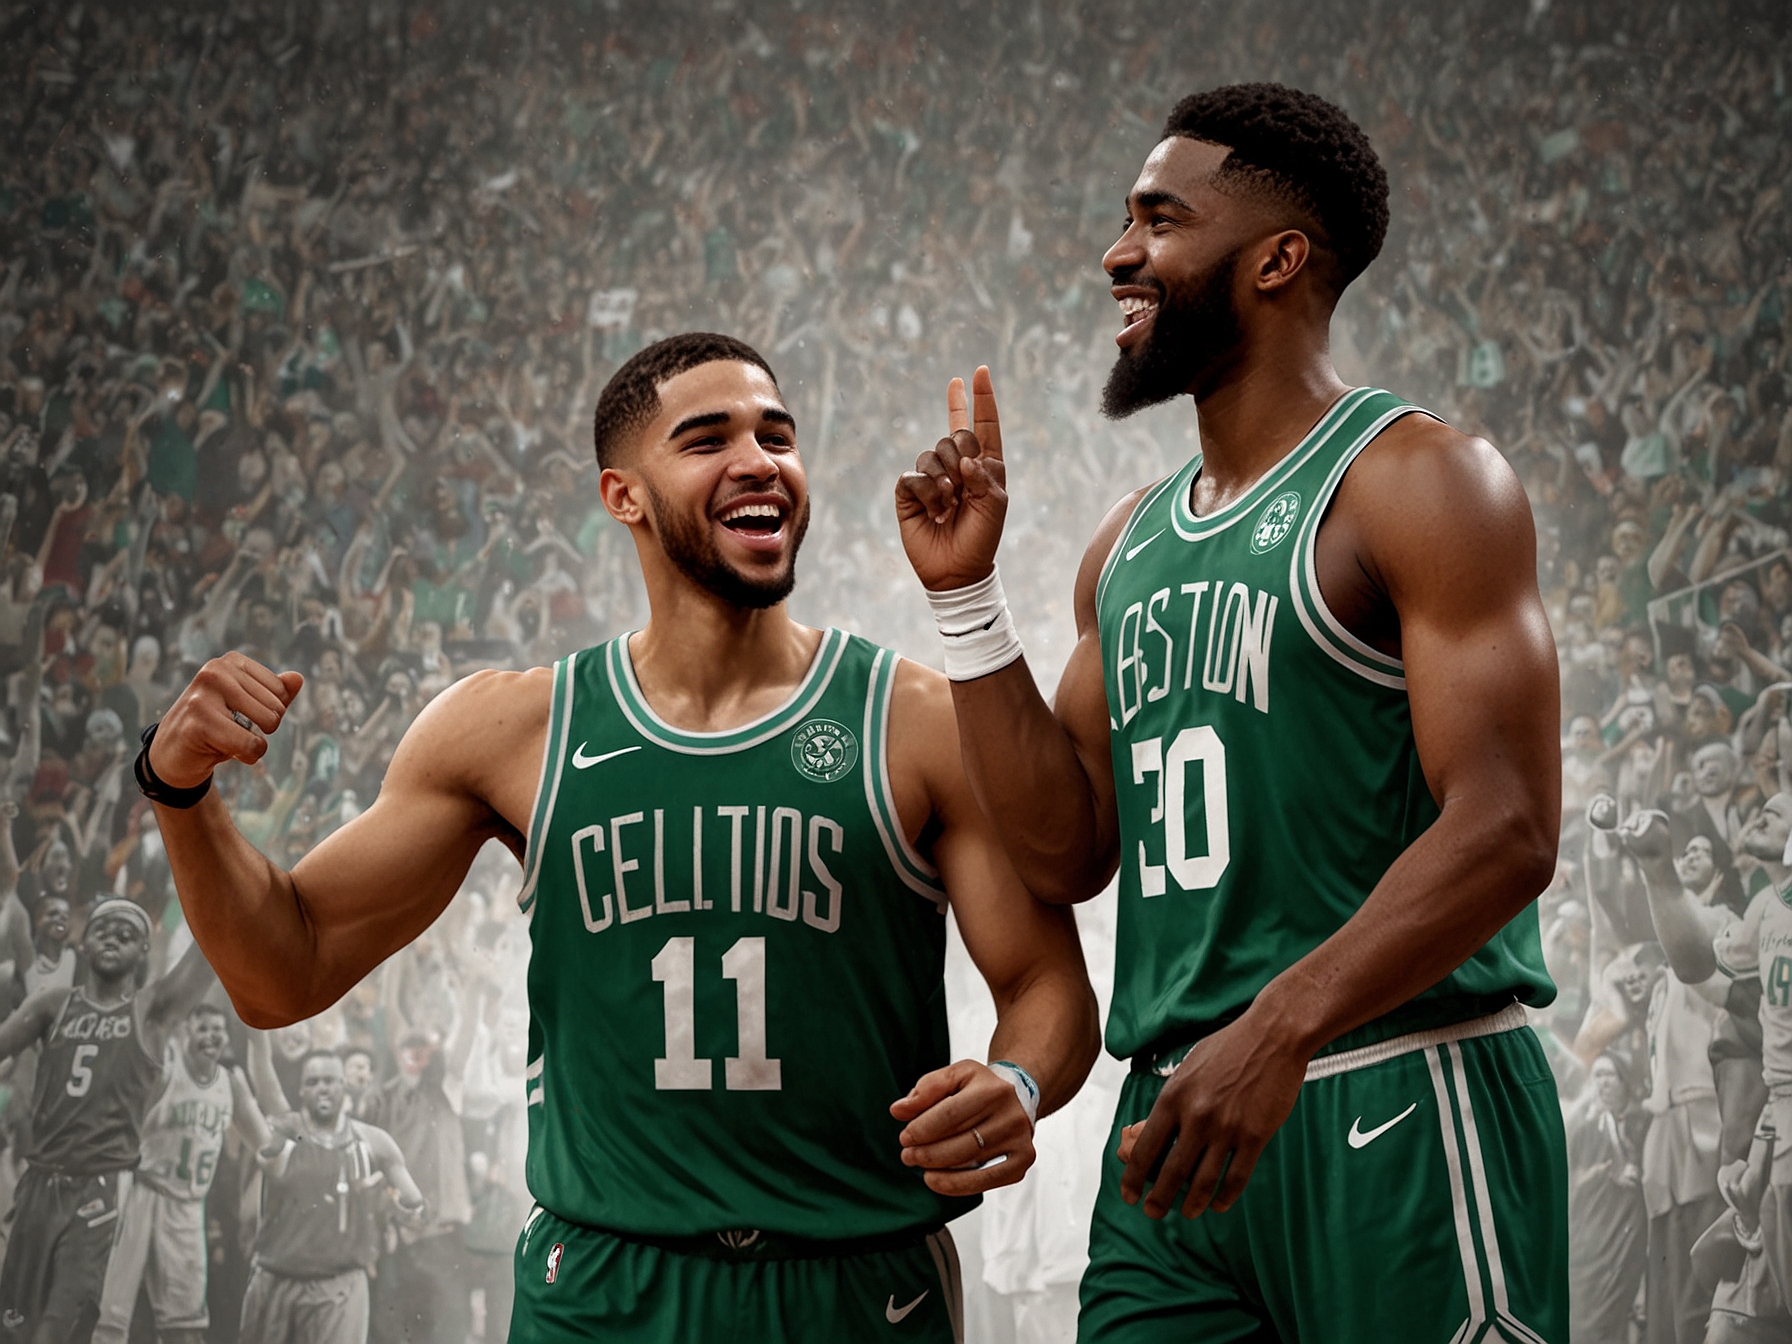 Jayson Tatum and Jaylen Brown celebrating a victory on the court, showcasing their strong chemistry and collaboration as key players for the Boston Celtics.